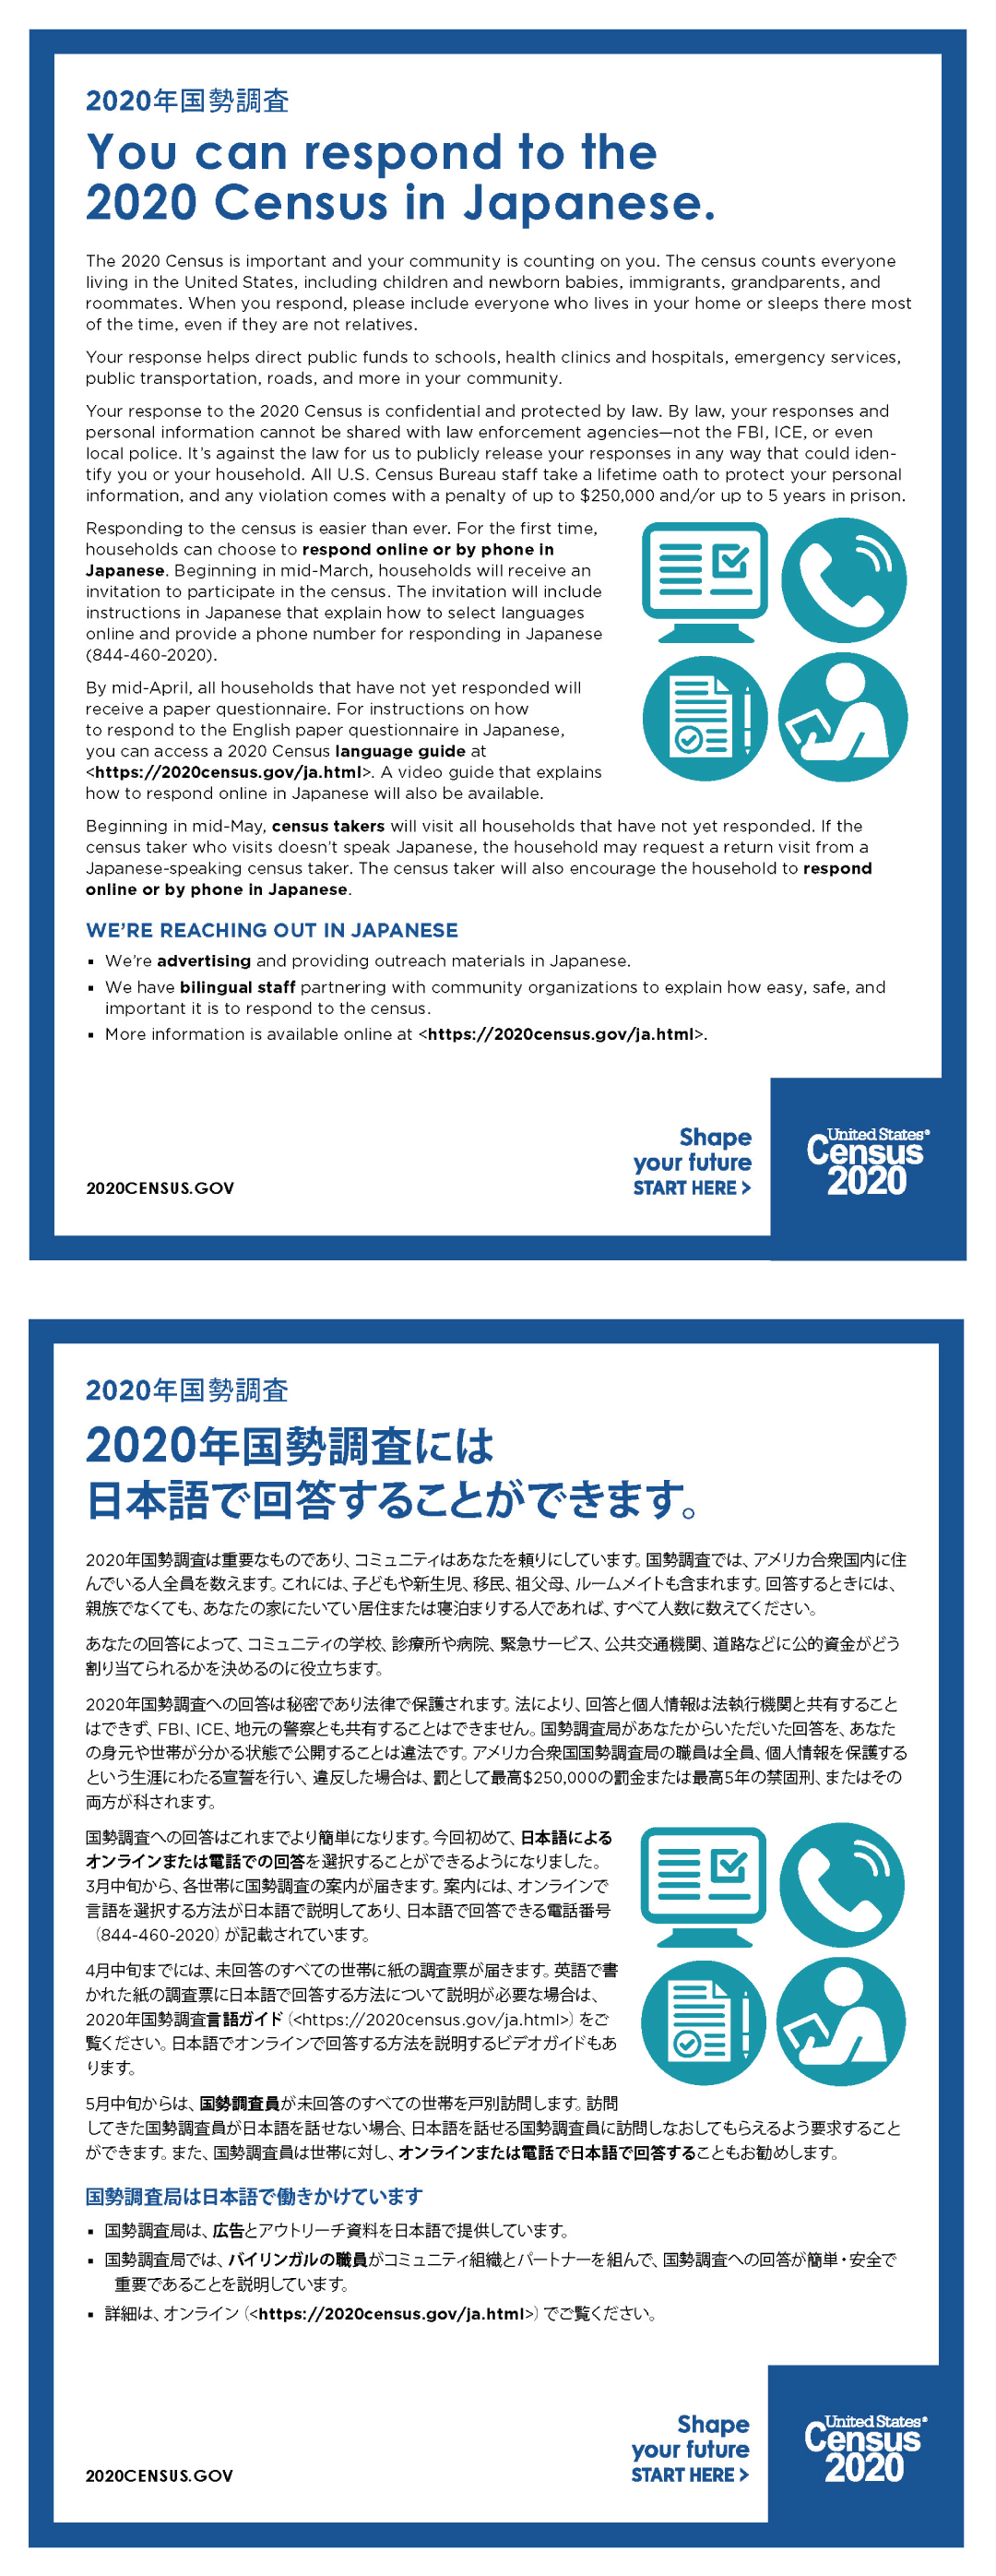 You can respond to the 2020 Census in Japanese. (2020年国勢調査には 日本語で回答することができます。)